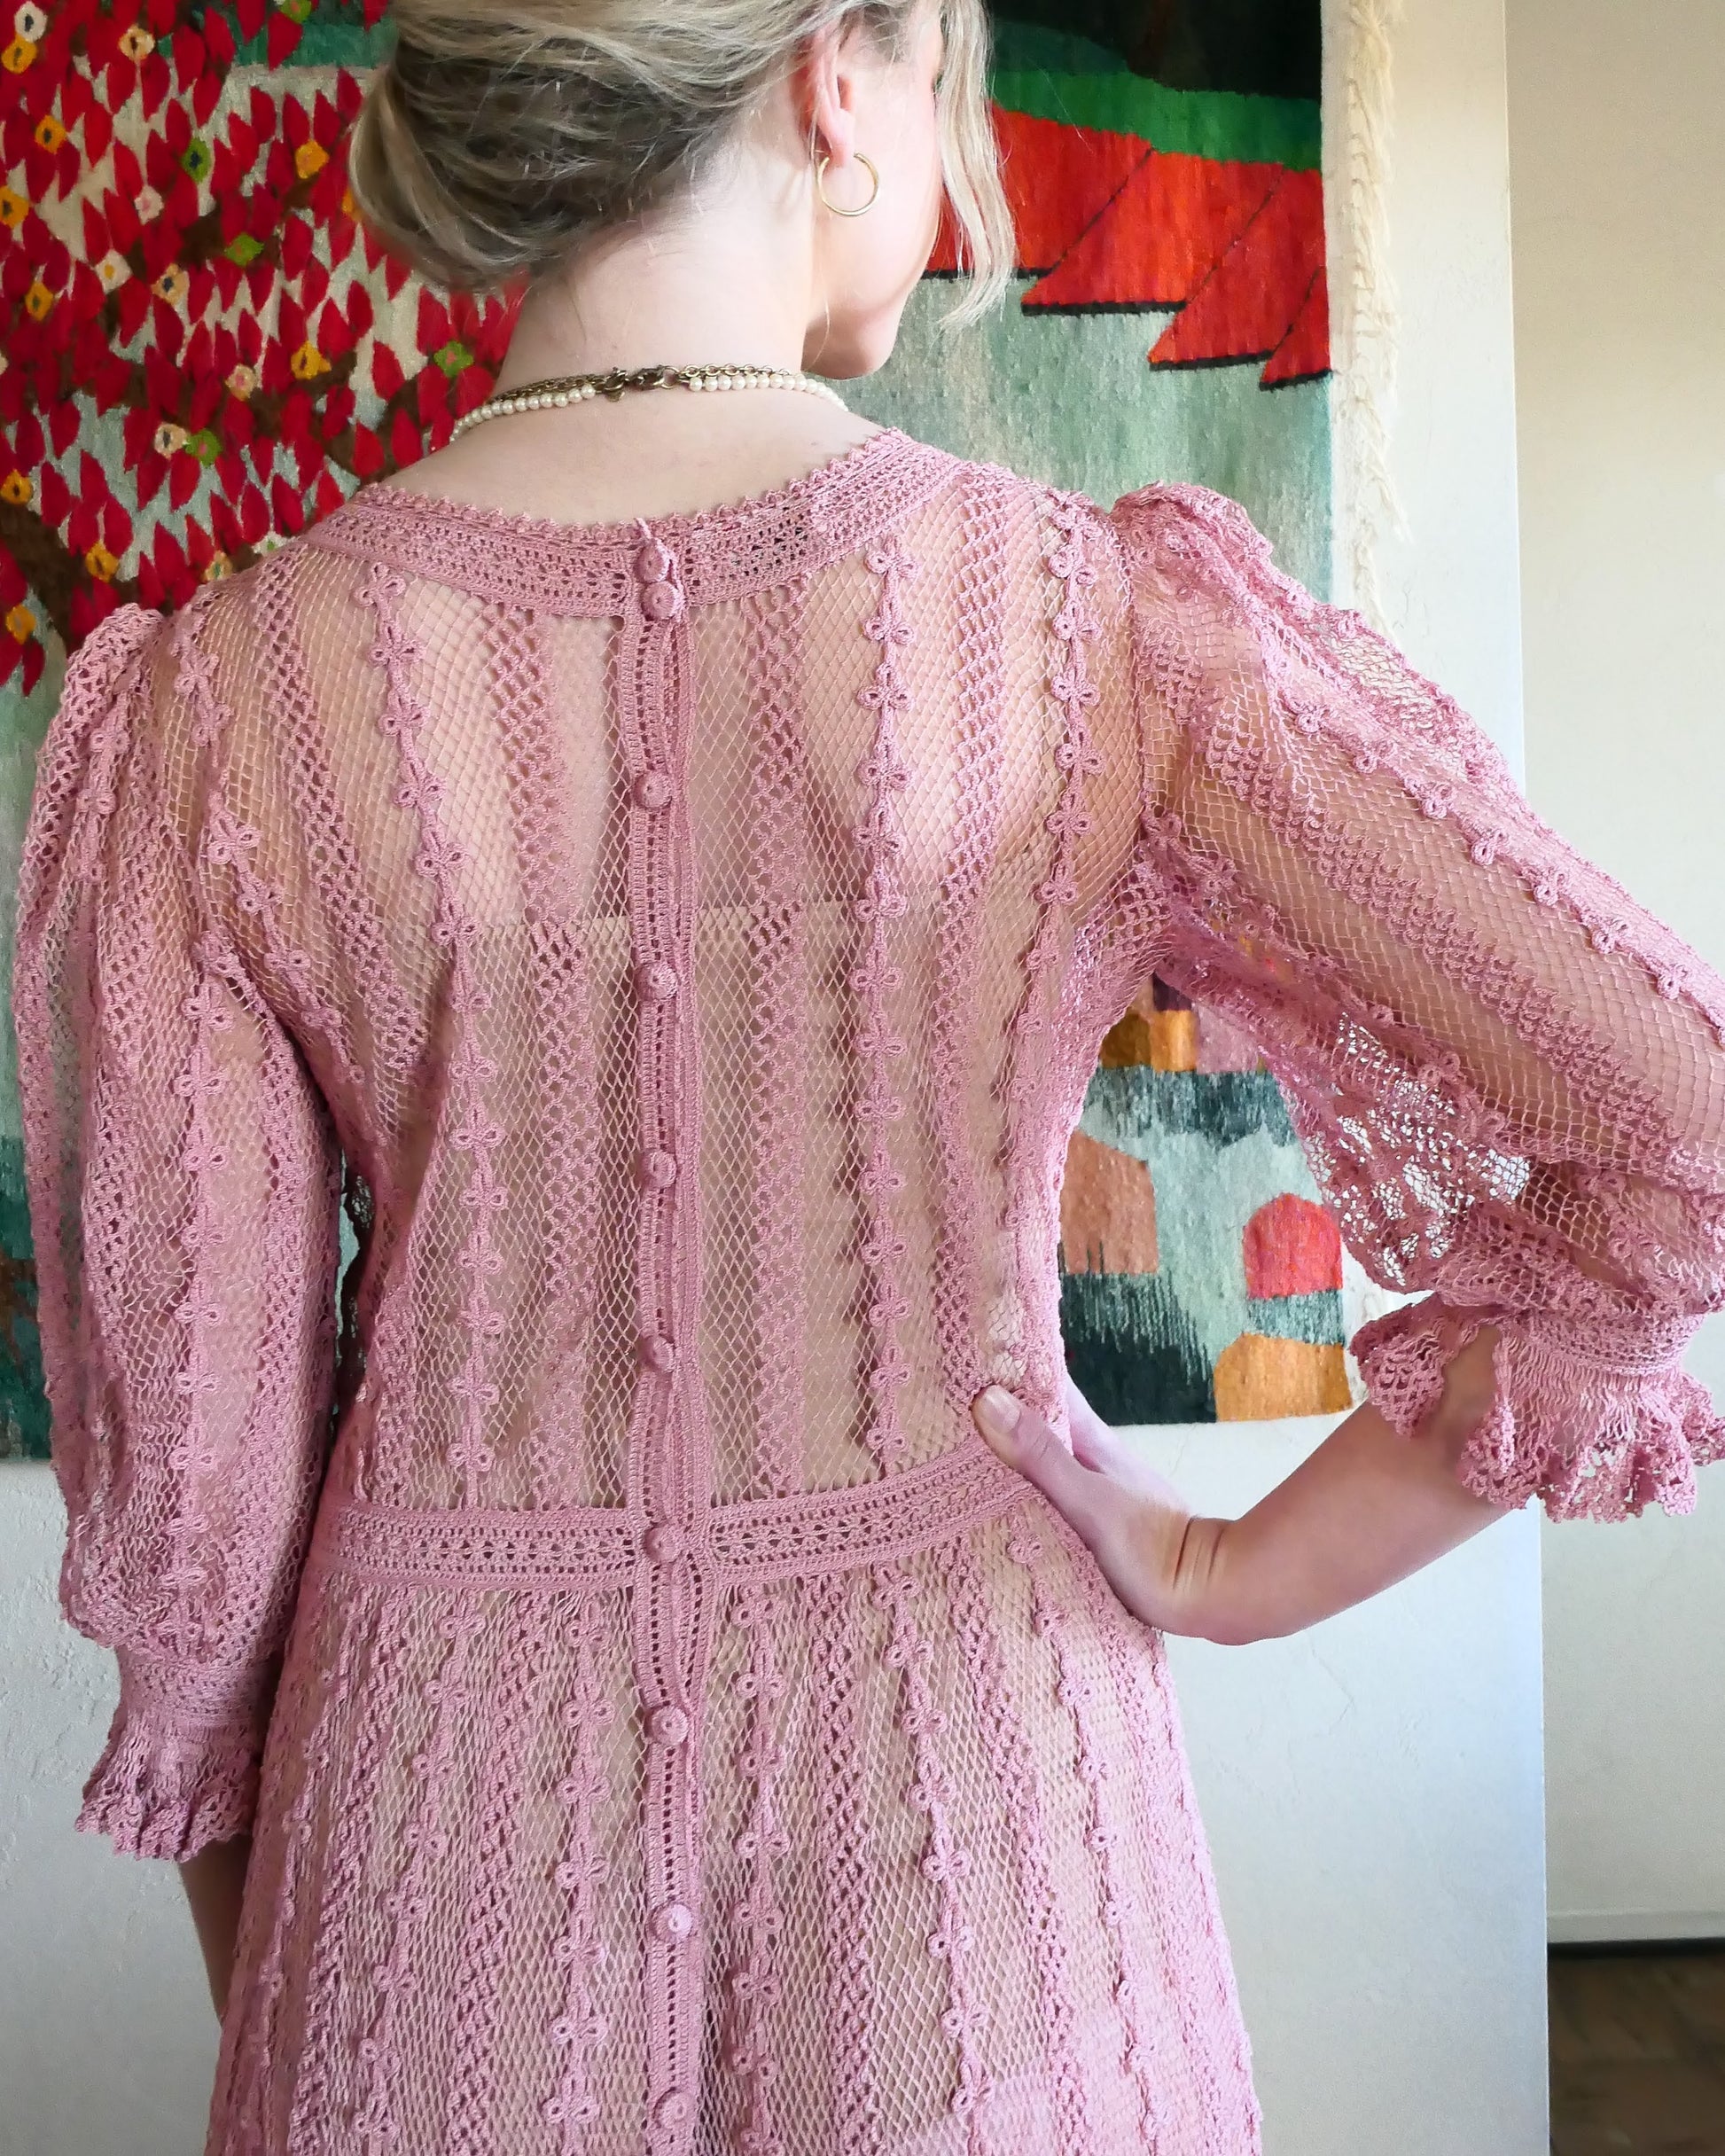 Closeup view of back of dress.  Buttons up the back.  One of our original Lim's crochet maxi dresses in a muted rose color from the 1980's. A darling of a piece and sure to turn heads, this dress was intricately hand crocheted using very fine cotton threads.   3/4 length sleeves, round collar, with ruffles at the wrist.  Model is wearing a natural colored slip underneath. 